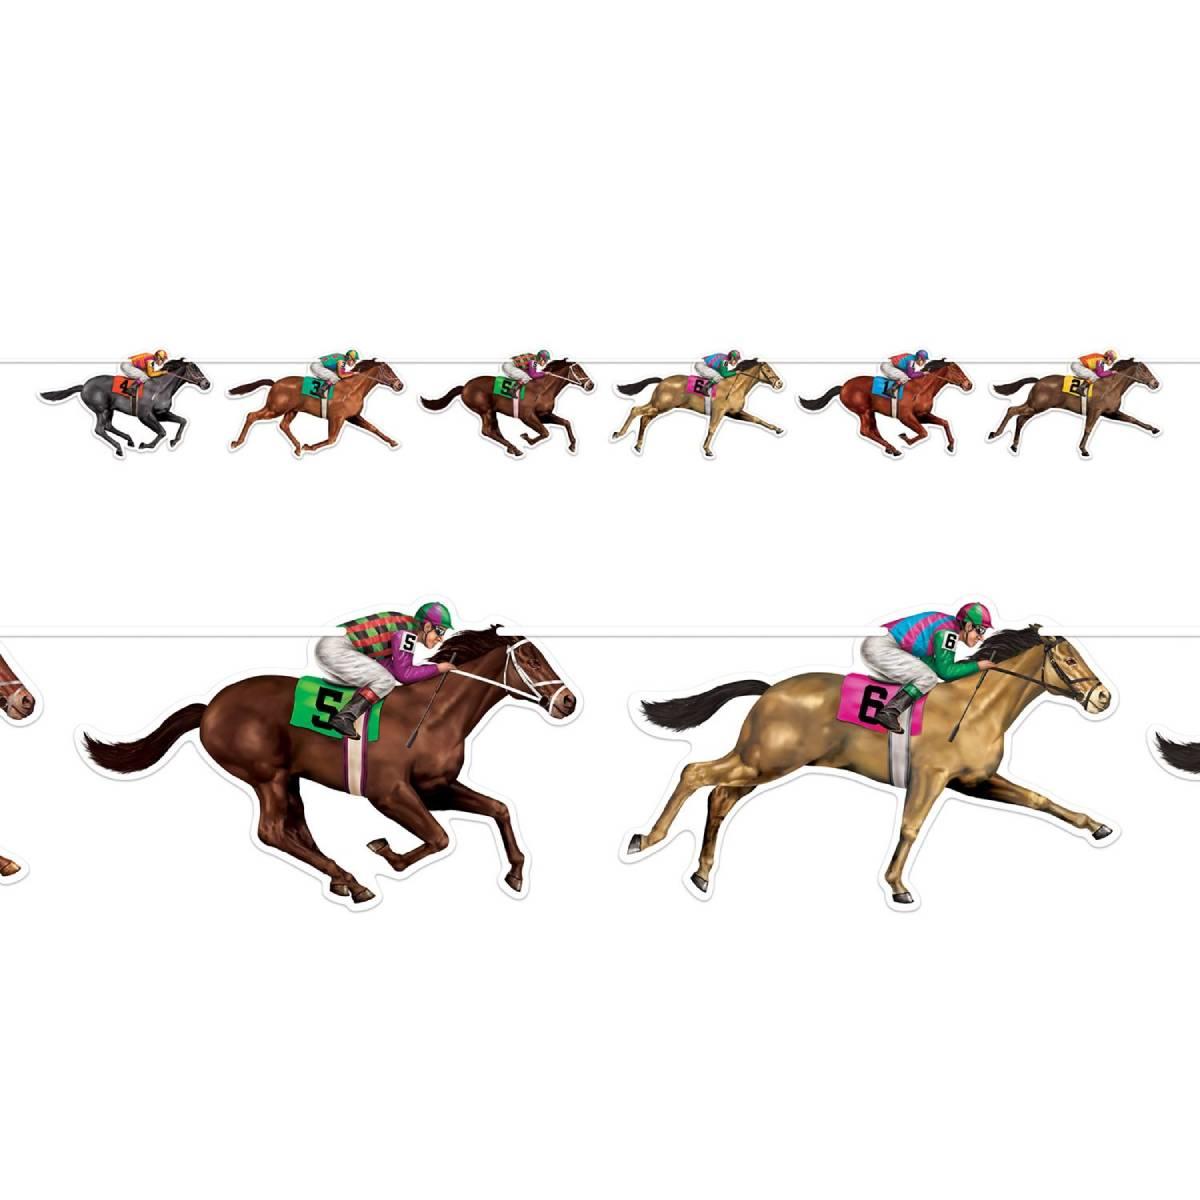 Horse Racing Streamer Banner 6ft length by Beistle 59951 available ere at Karnival Costumes online party shop